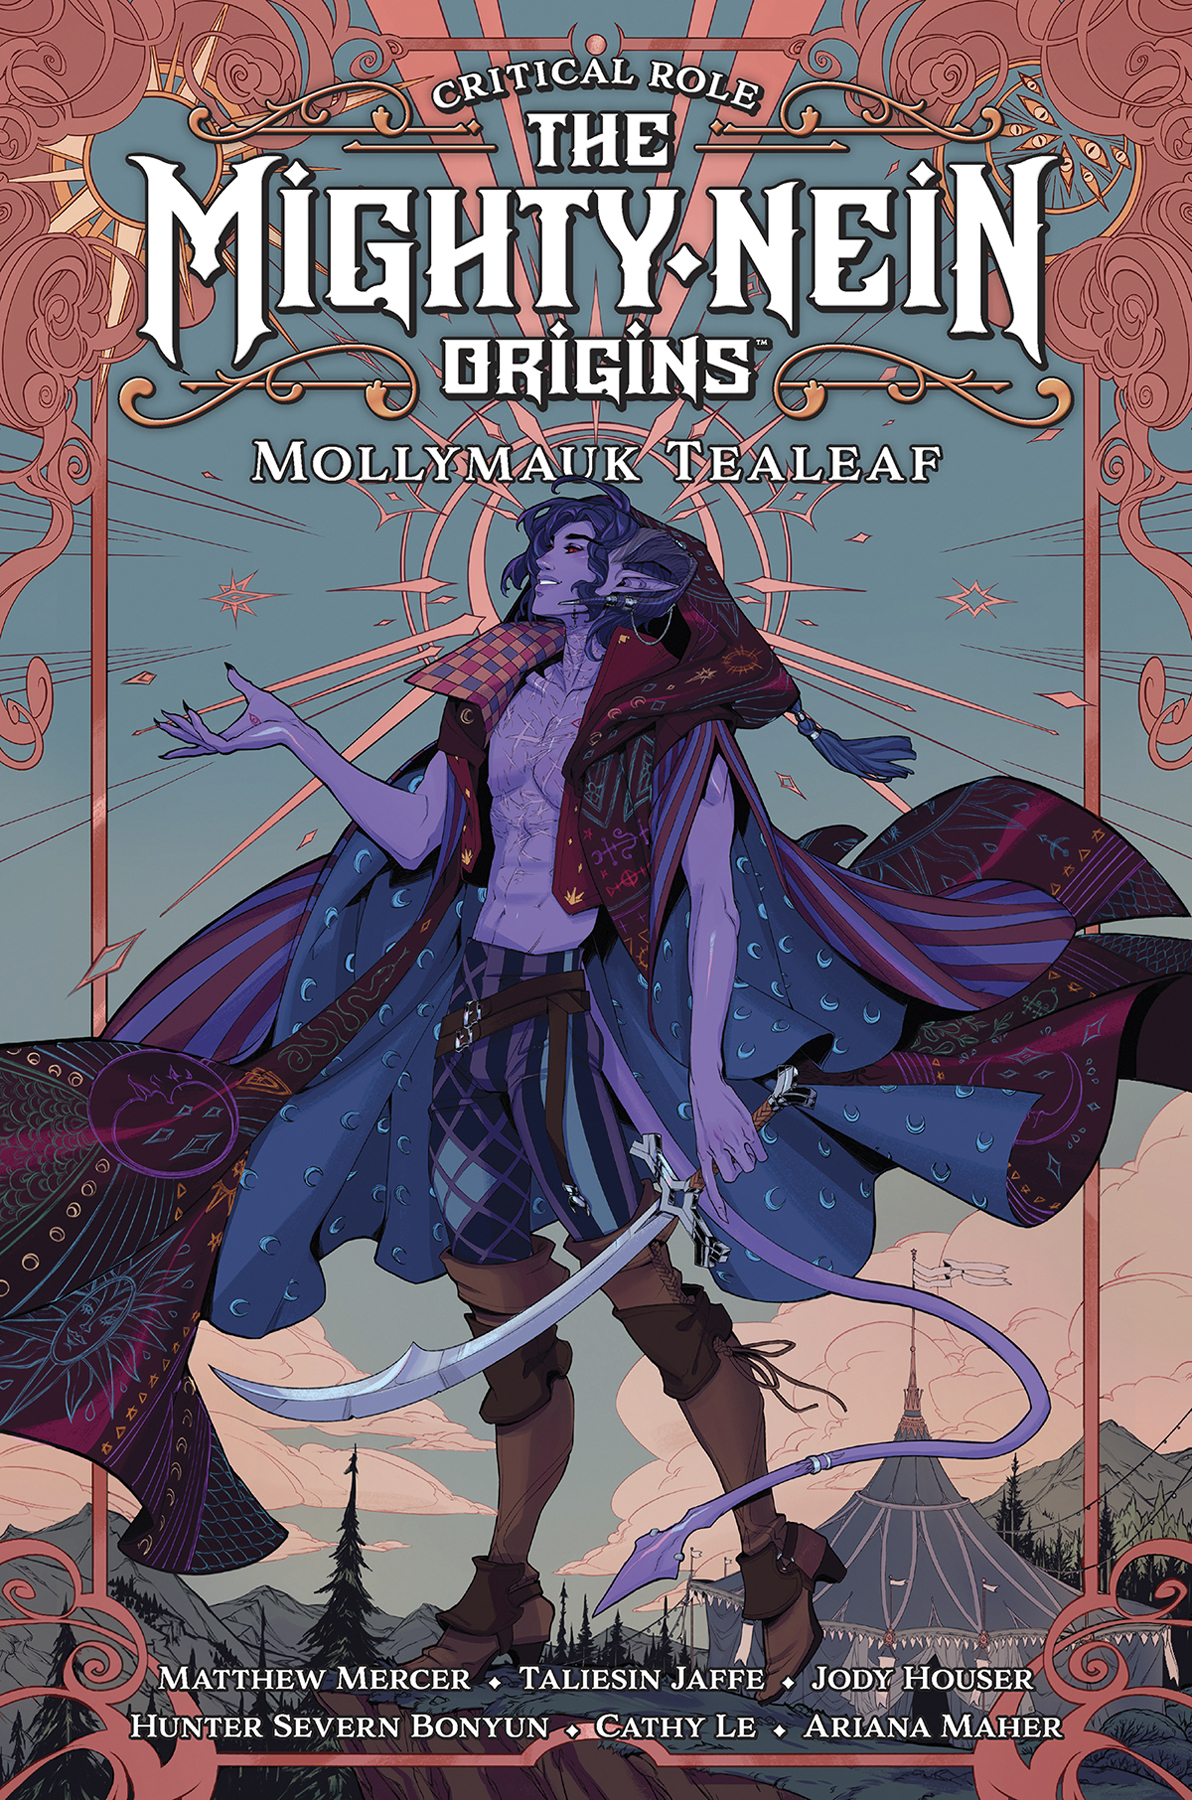 Critical Role the Mighty Nein Origins Hardcover Graphic Novel Volume 6 Mollymauk Tealeaf